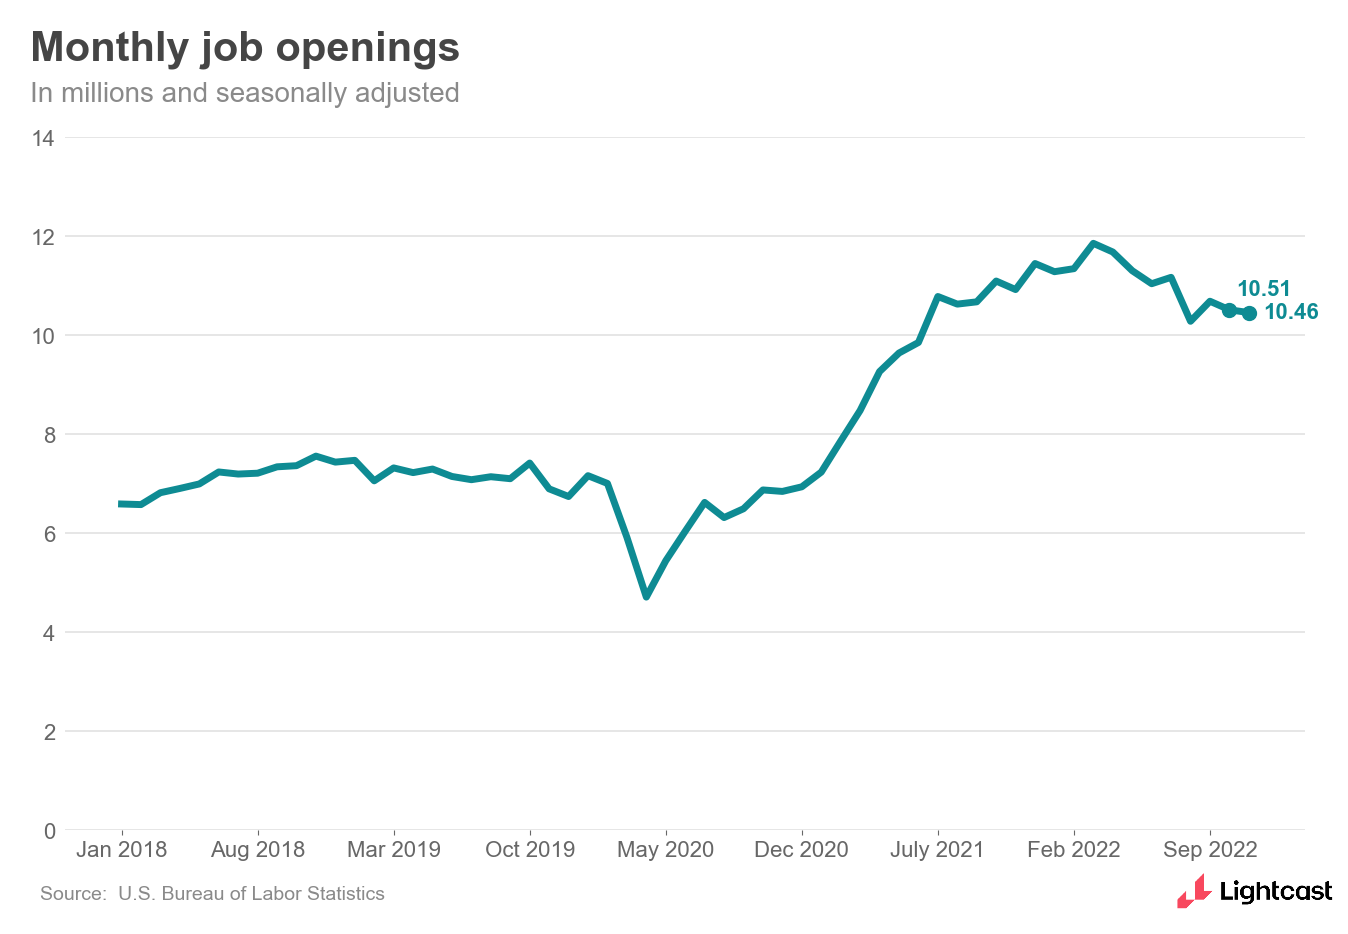 chart showing monthly job openings over time, showing a very slight decline in november (from 10.51 to 10.46 million)